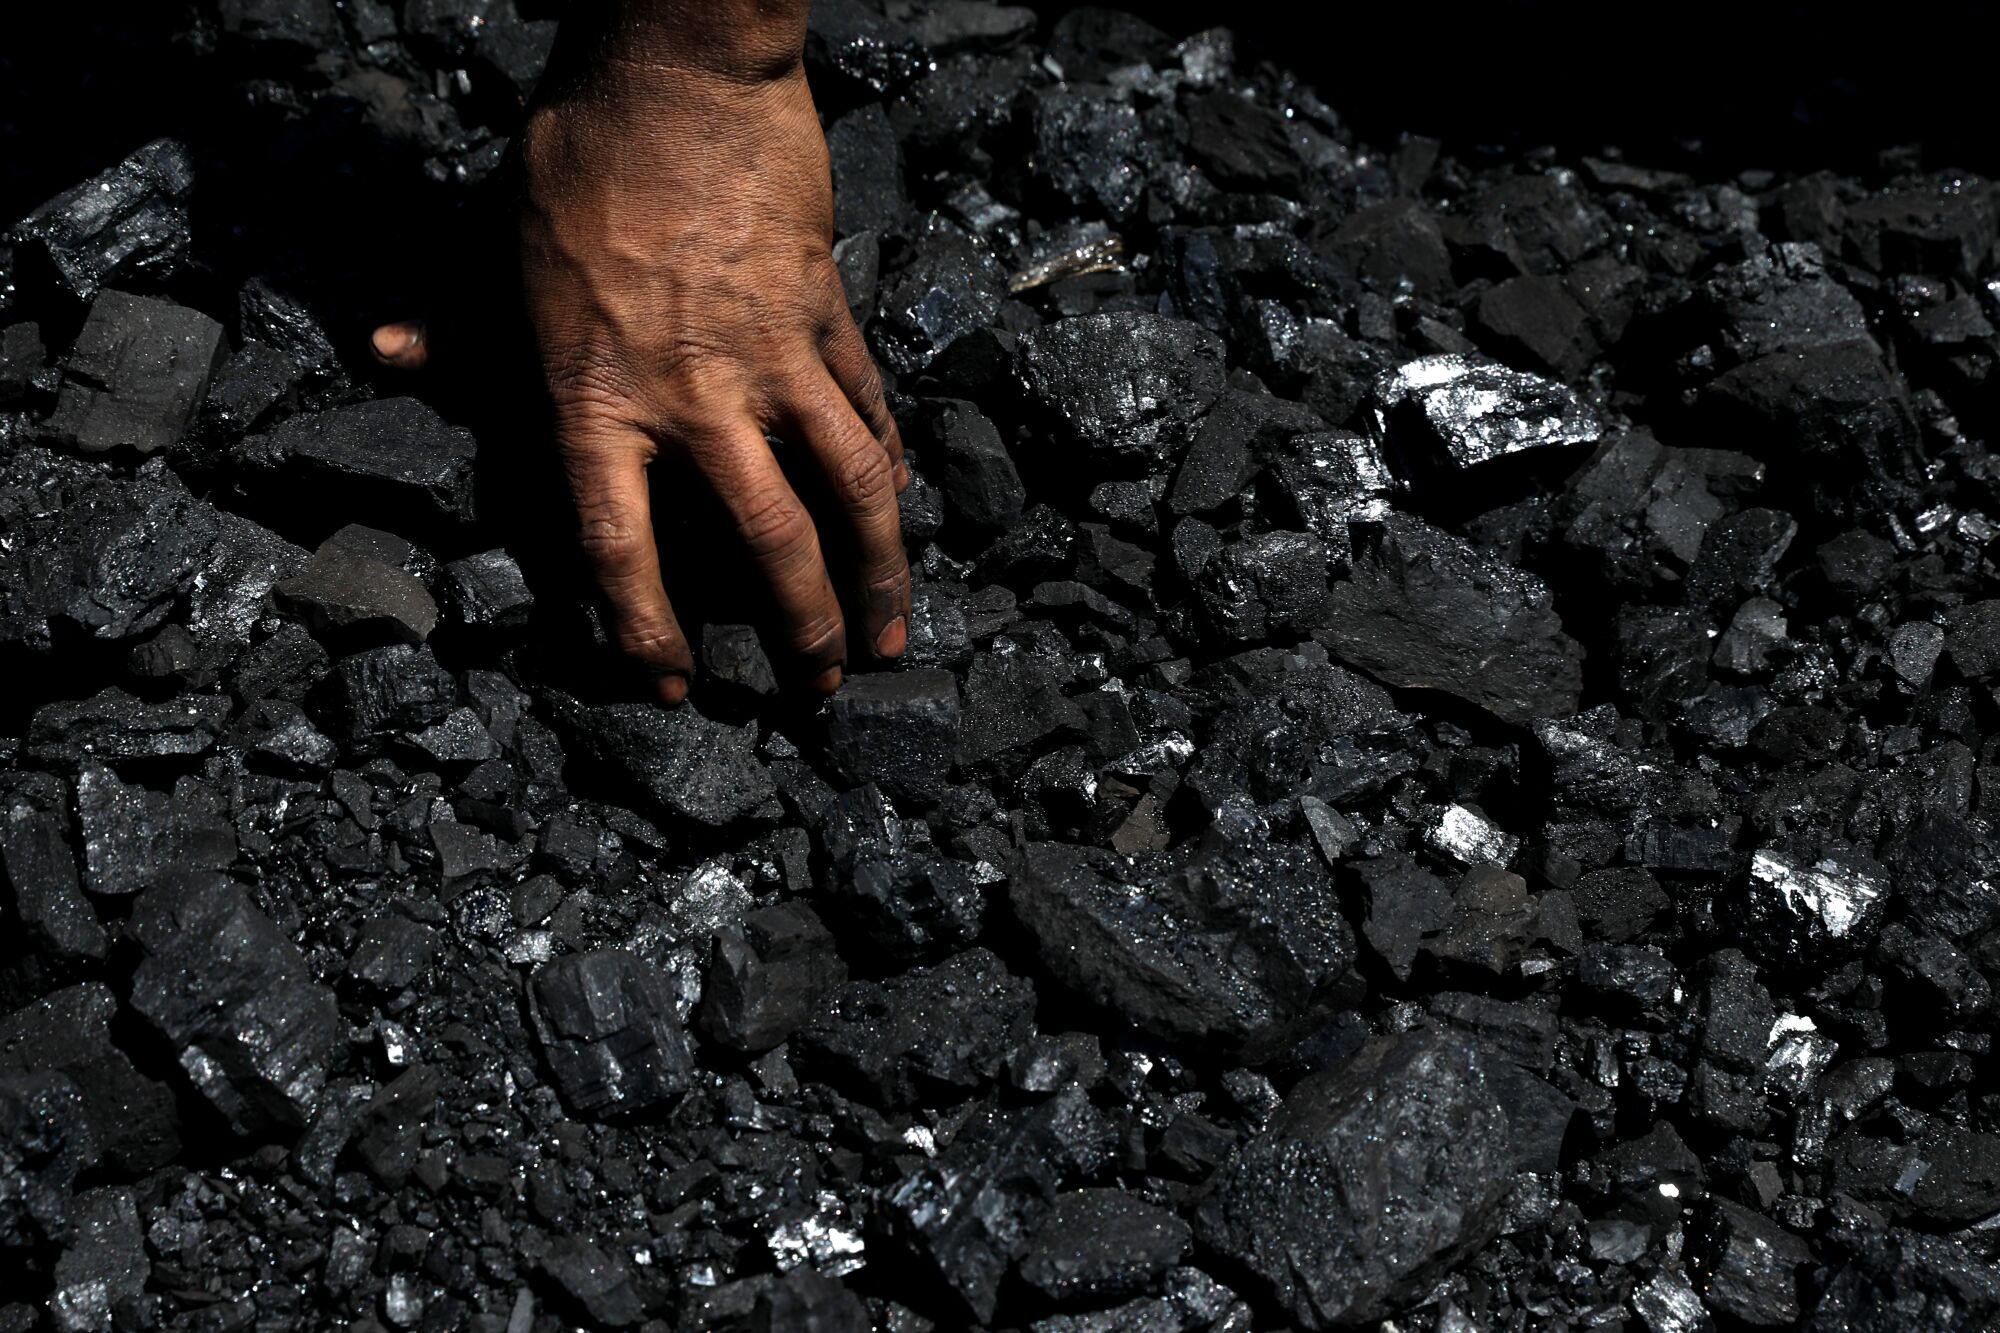  A hand separates pieces of coal.